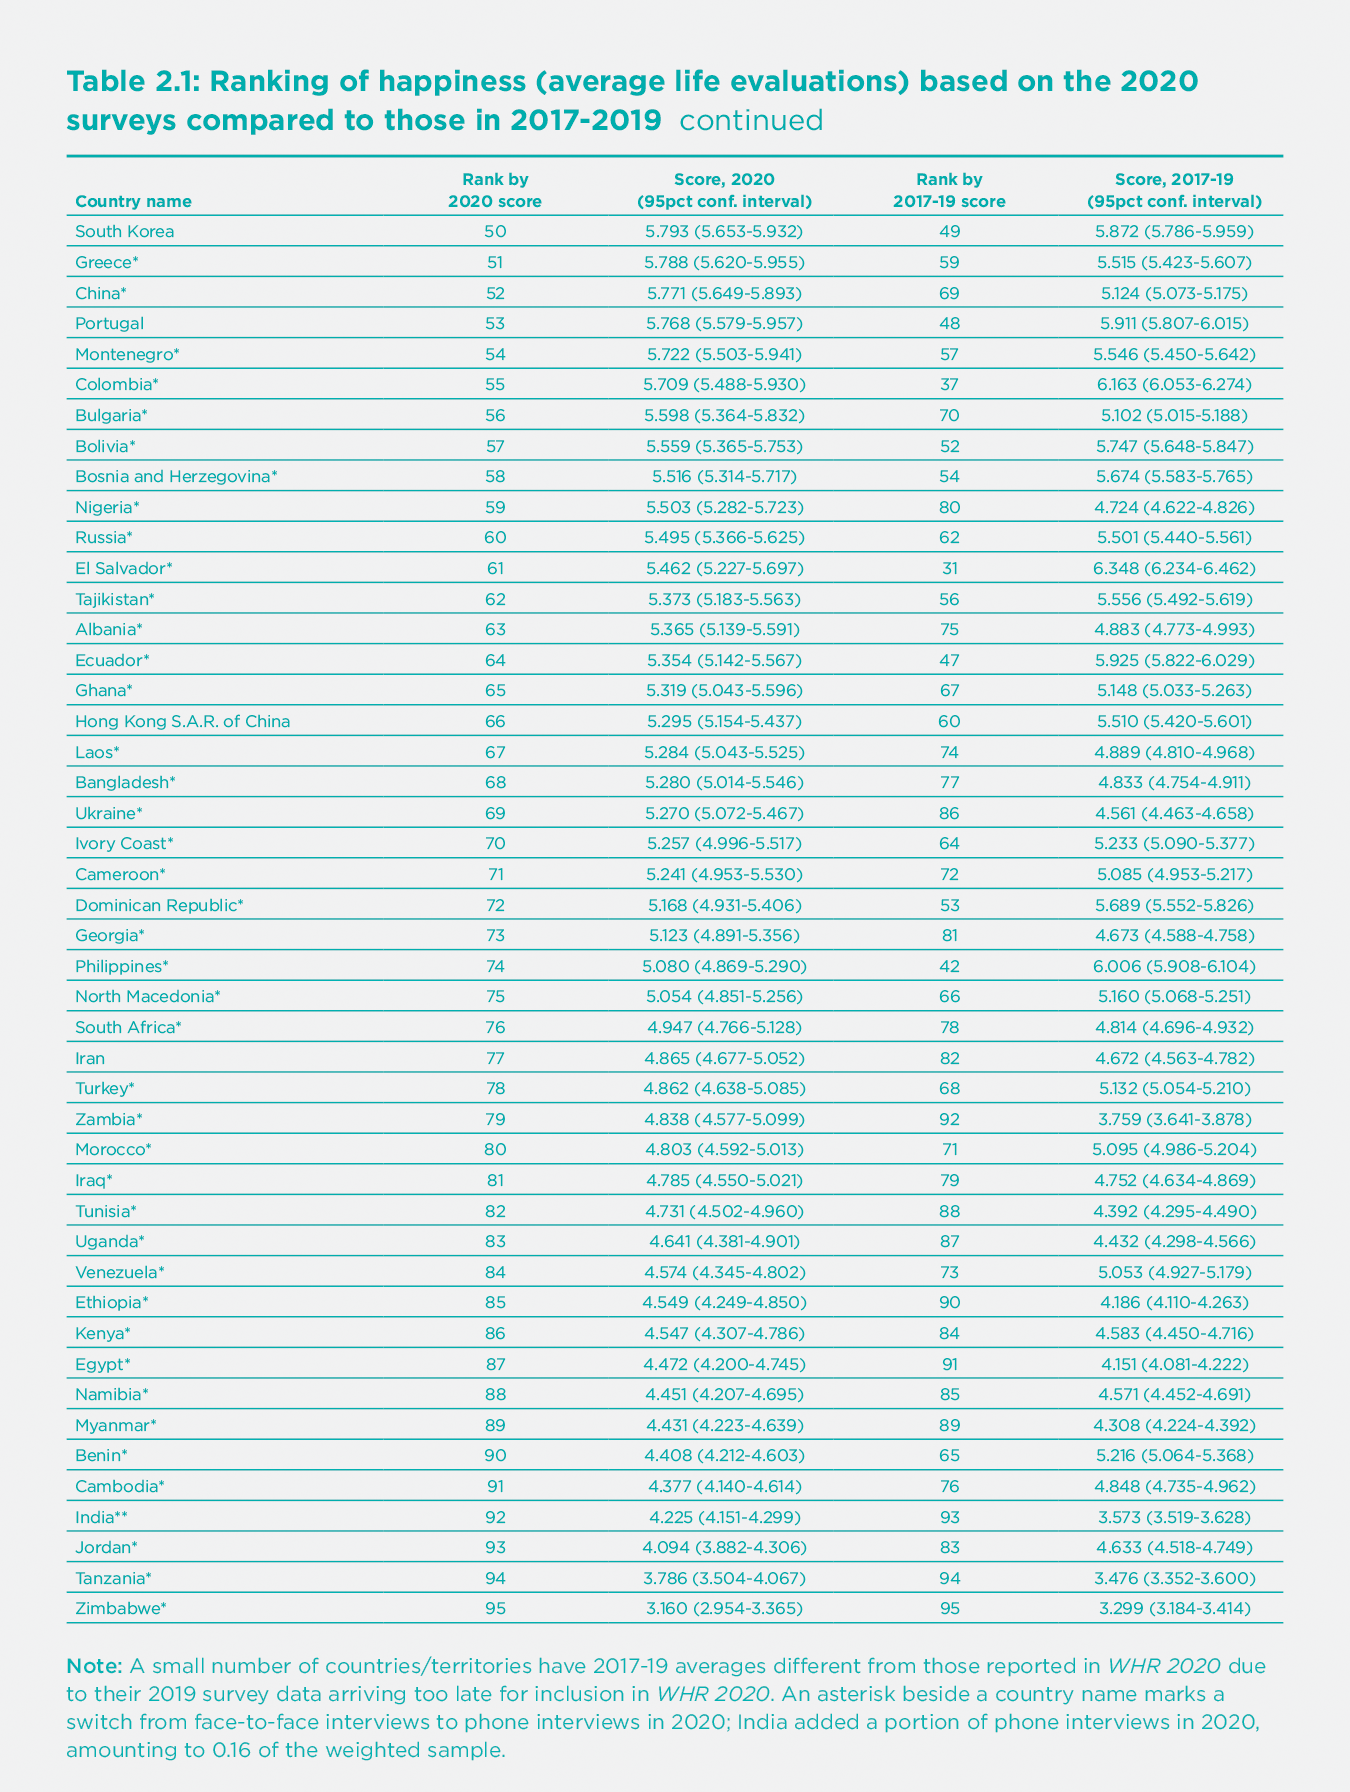 Table 2.1. Ranking of happiness (average life evaluations) based on the 2020 surveys compared to those in 2017-2019